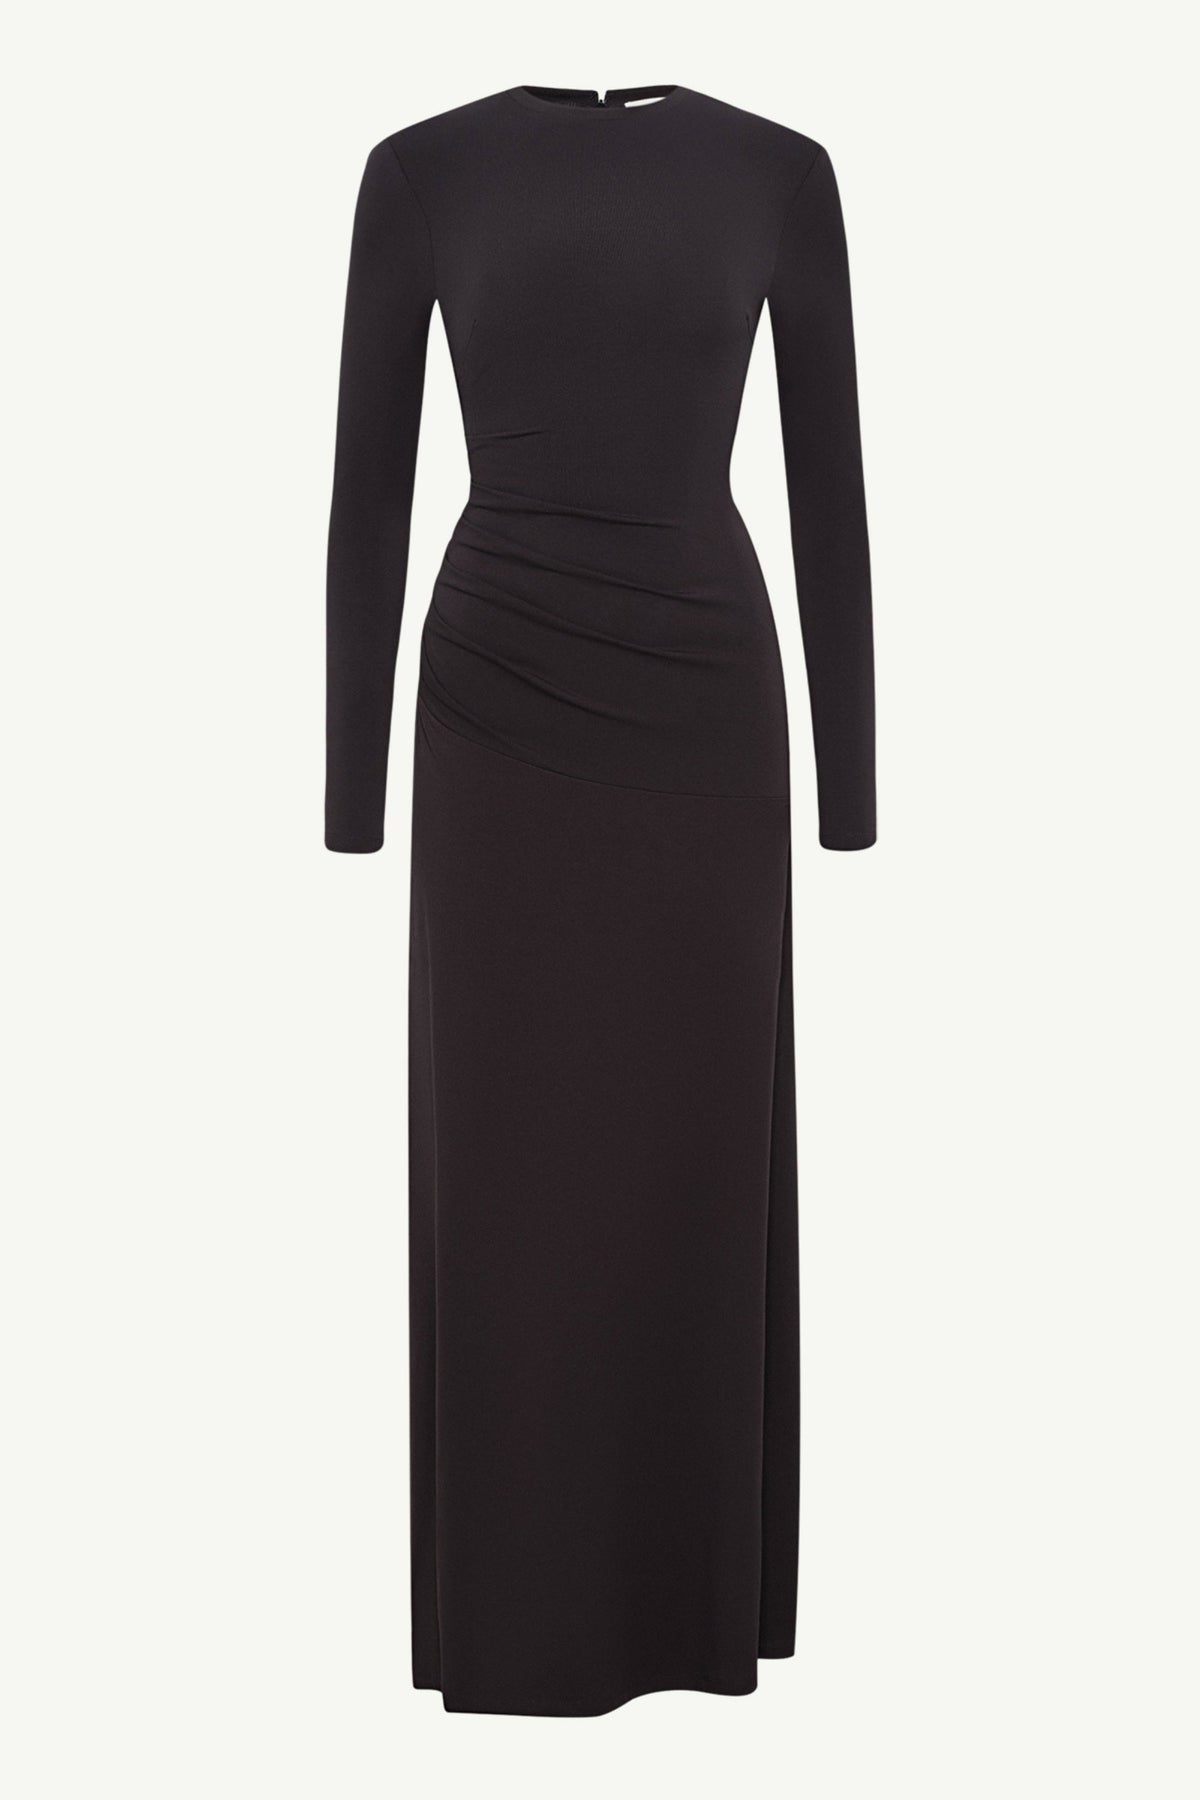 Natalie Rouched Jersey Maxi Dress - Black Clothing epschoolboard 